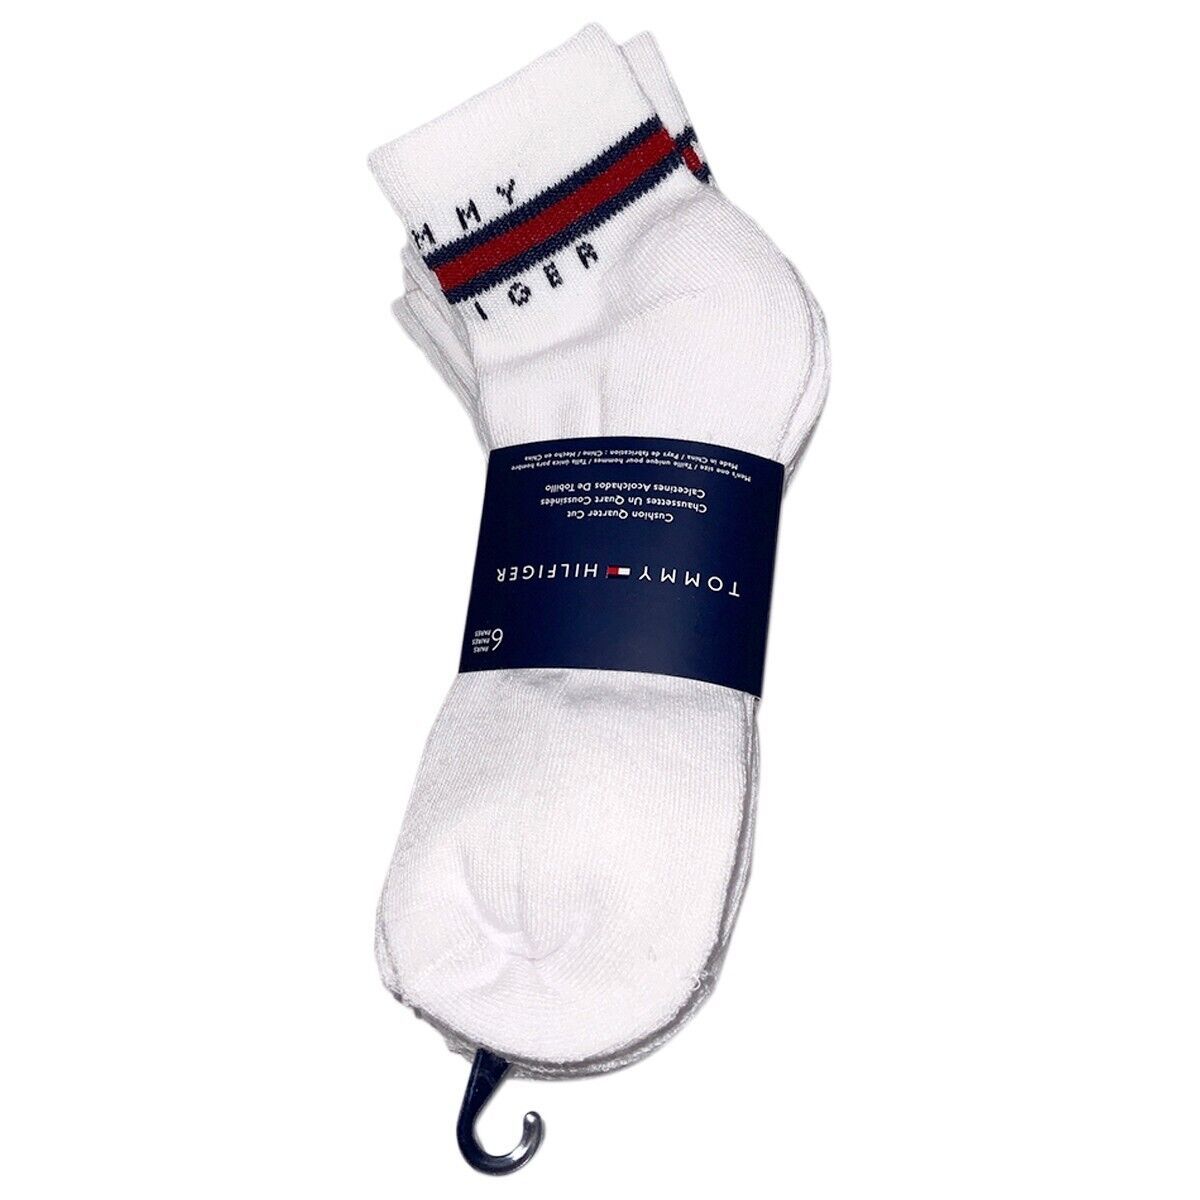 Primary image for NWT 6-PAIRS PACK TOMMY HILFIGER MSRP $27.99 MEN'S WHITE QUARTER CUT SOCKS 7-12